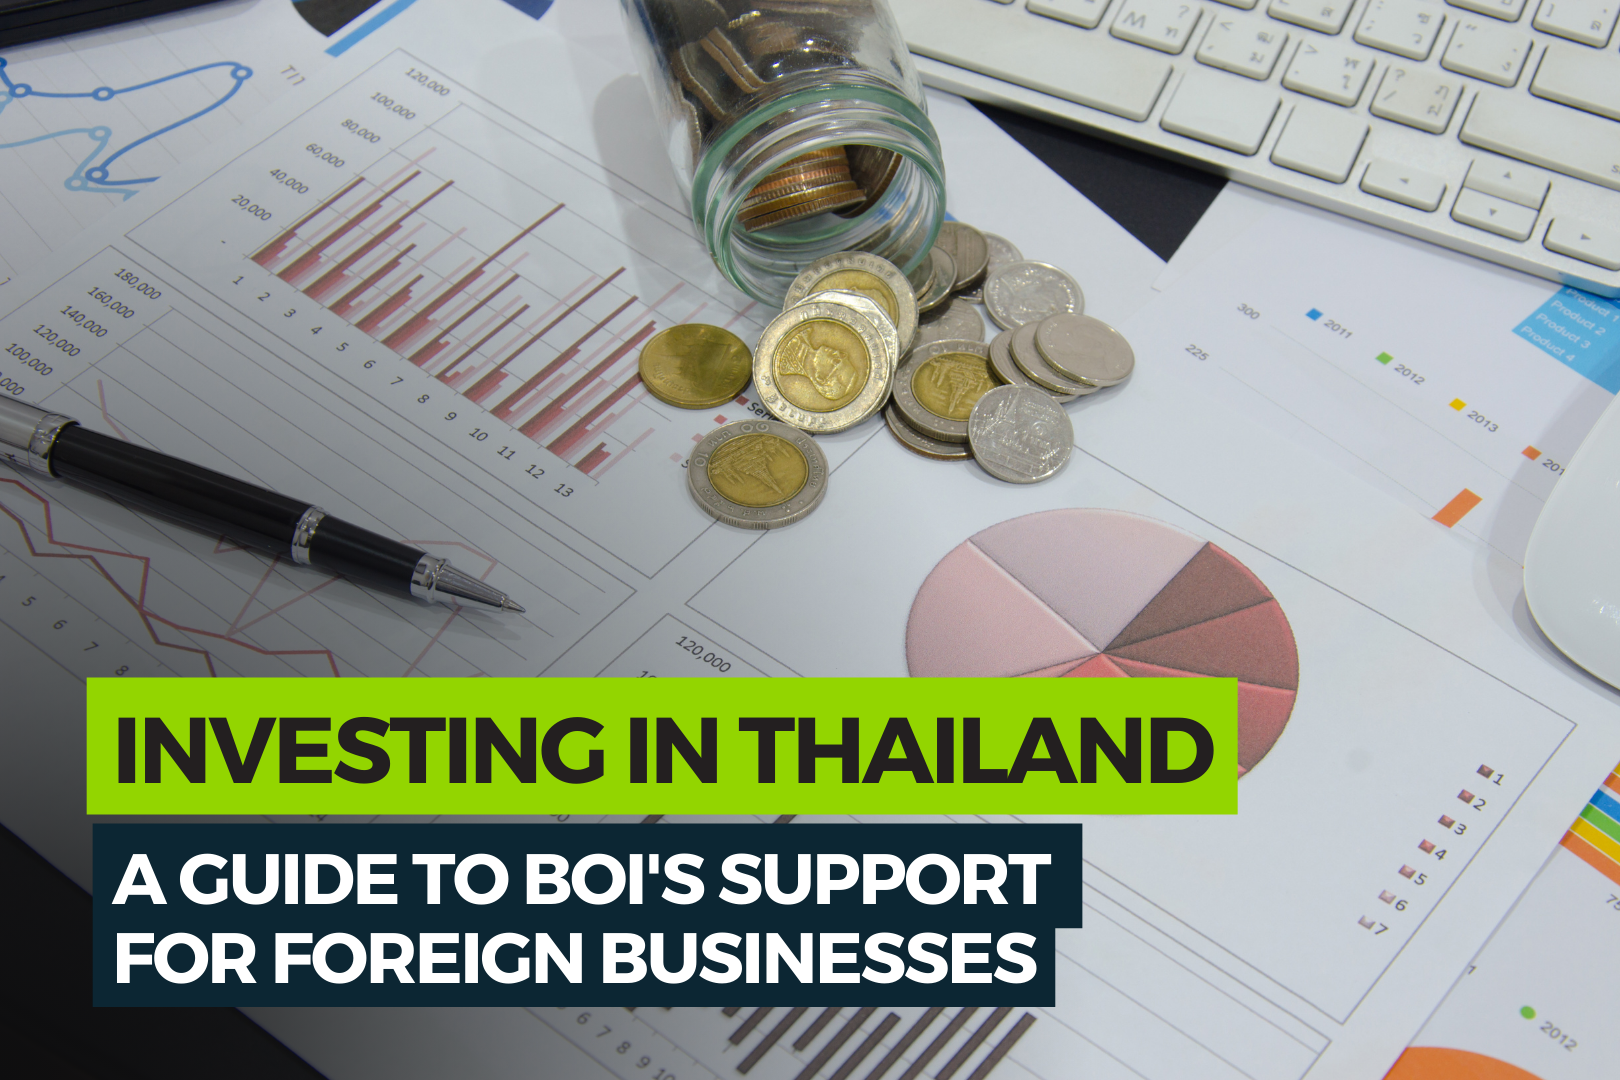 Investing in Thailand with BOI's Support